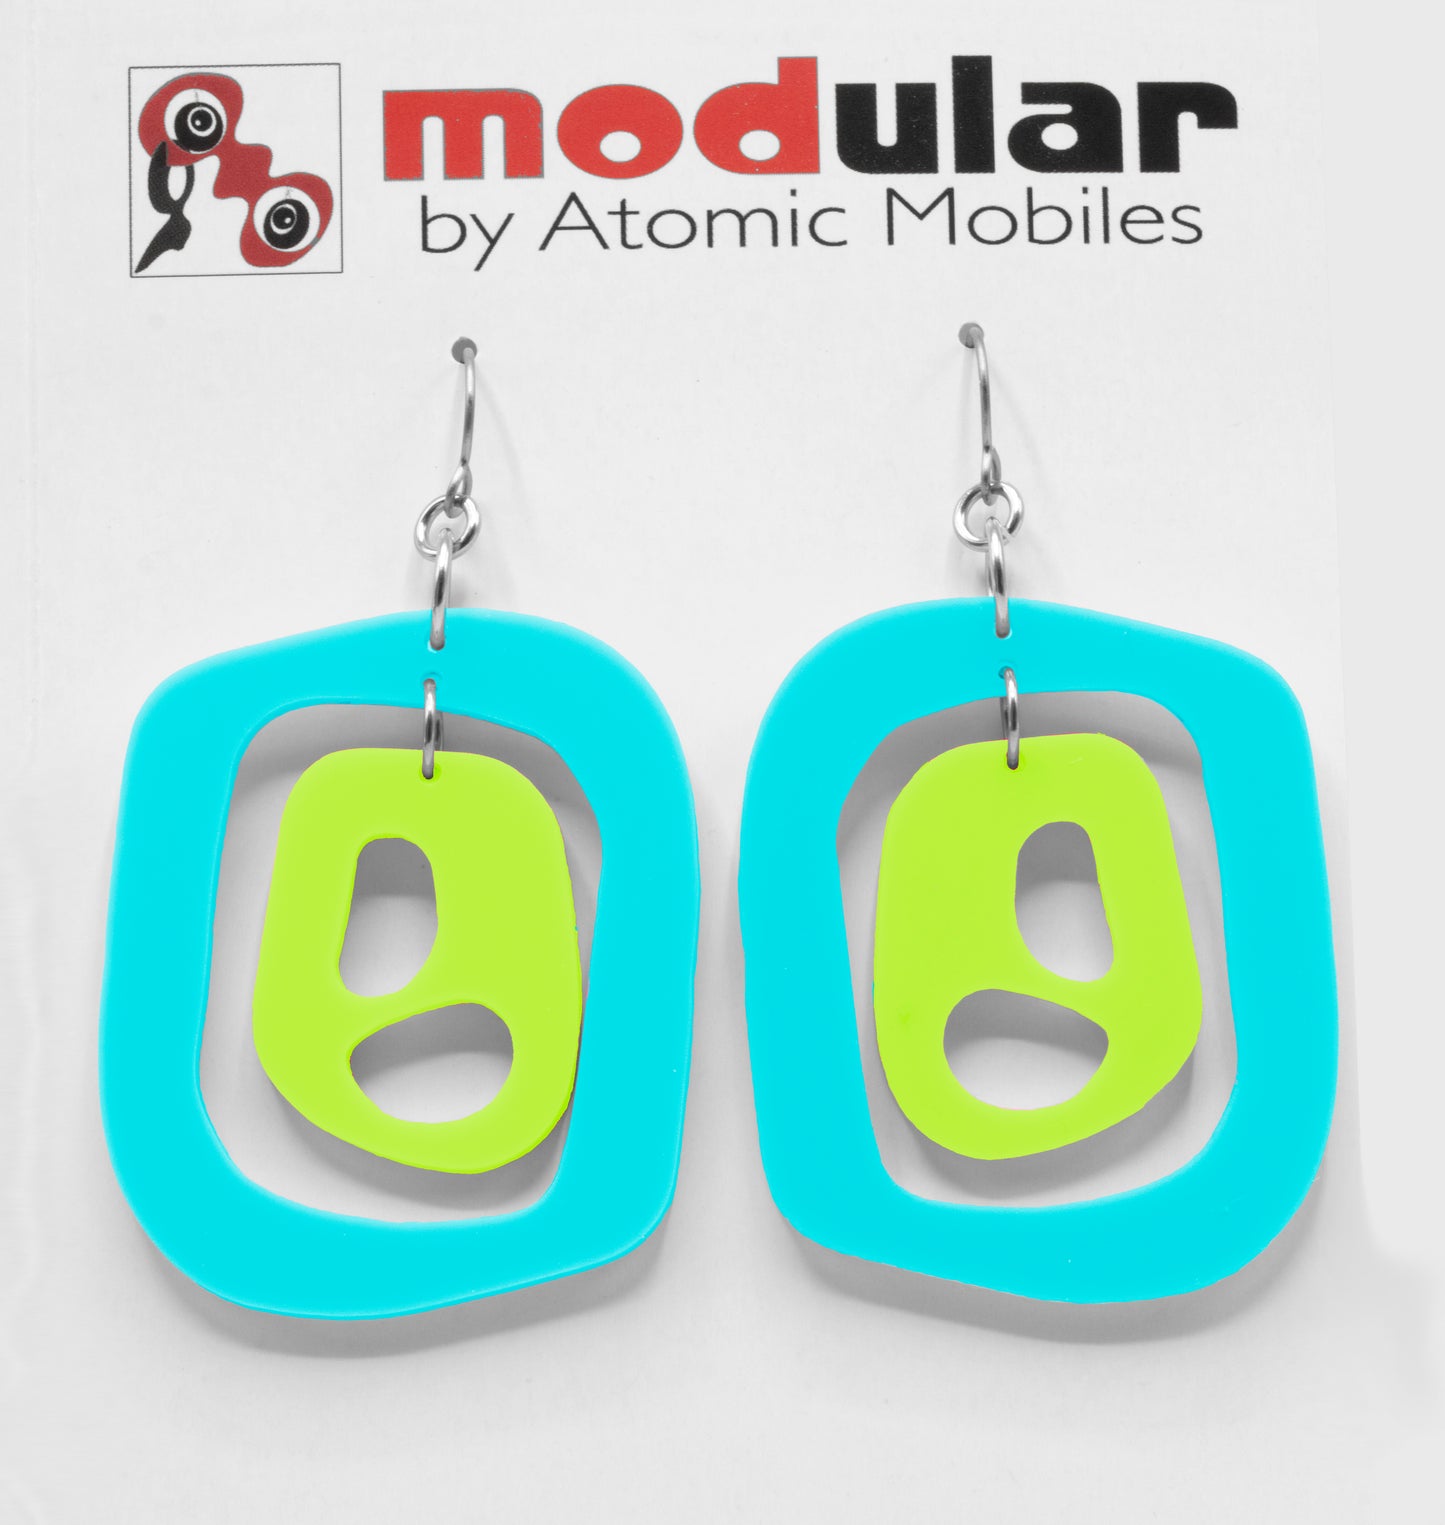 MODular Earrings - Mid 20th Statement Earrings in Aqua and Lime by AtomicMobiles.com - retro era mod handmade jewelry